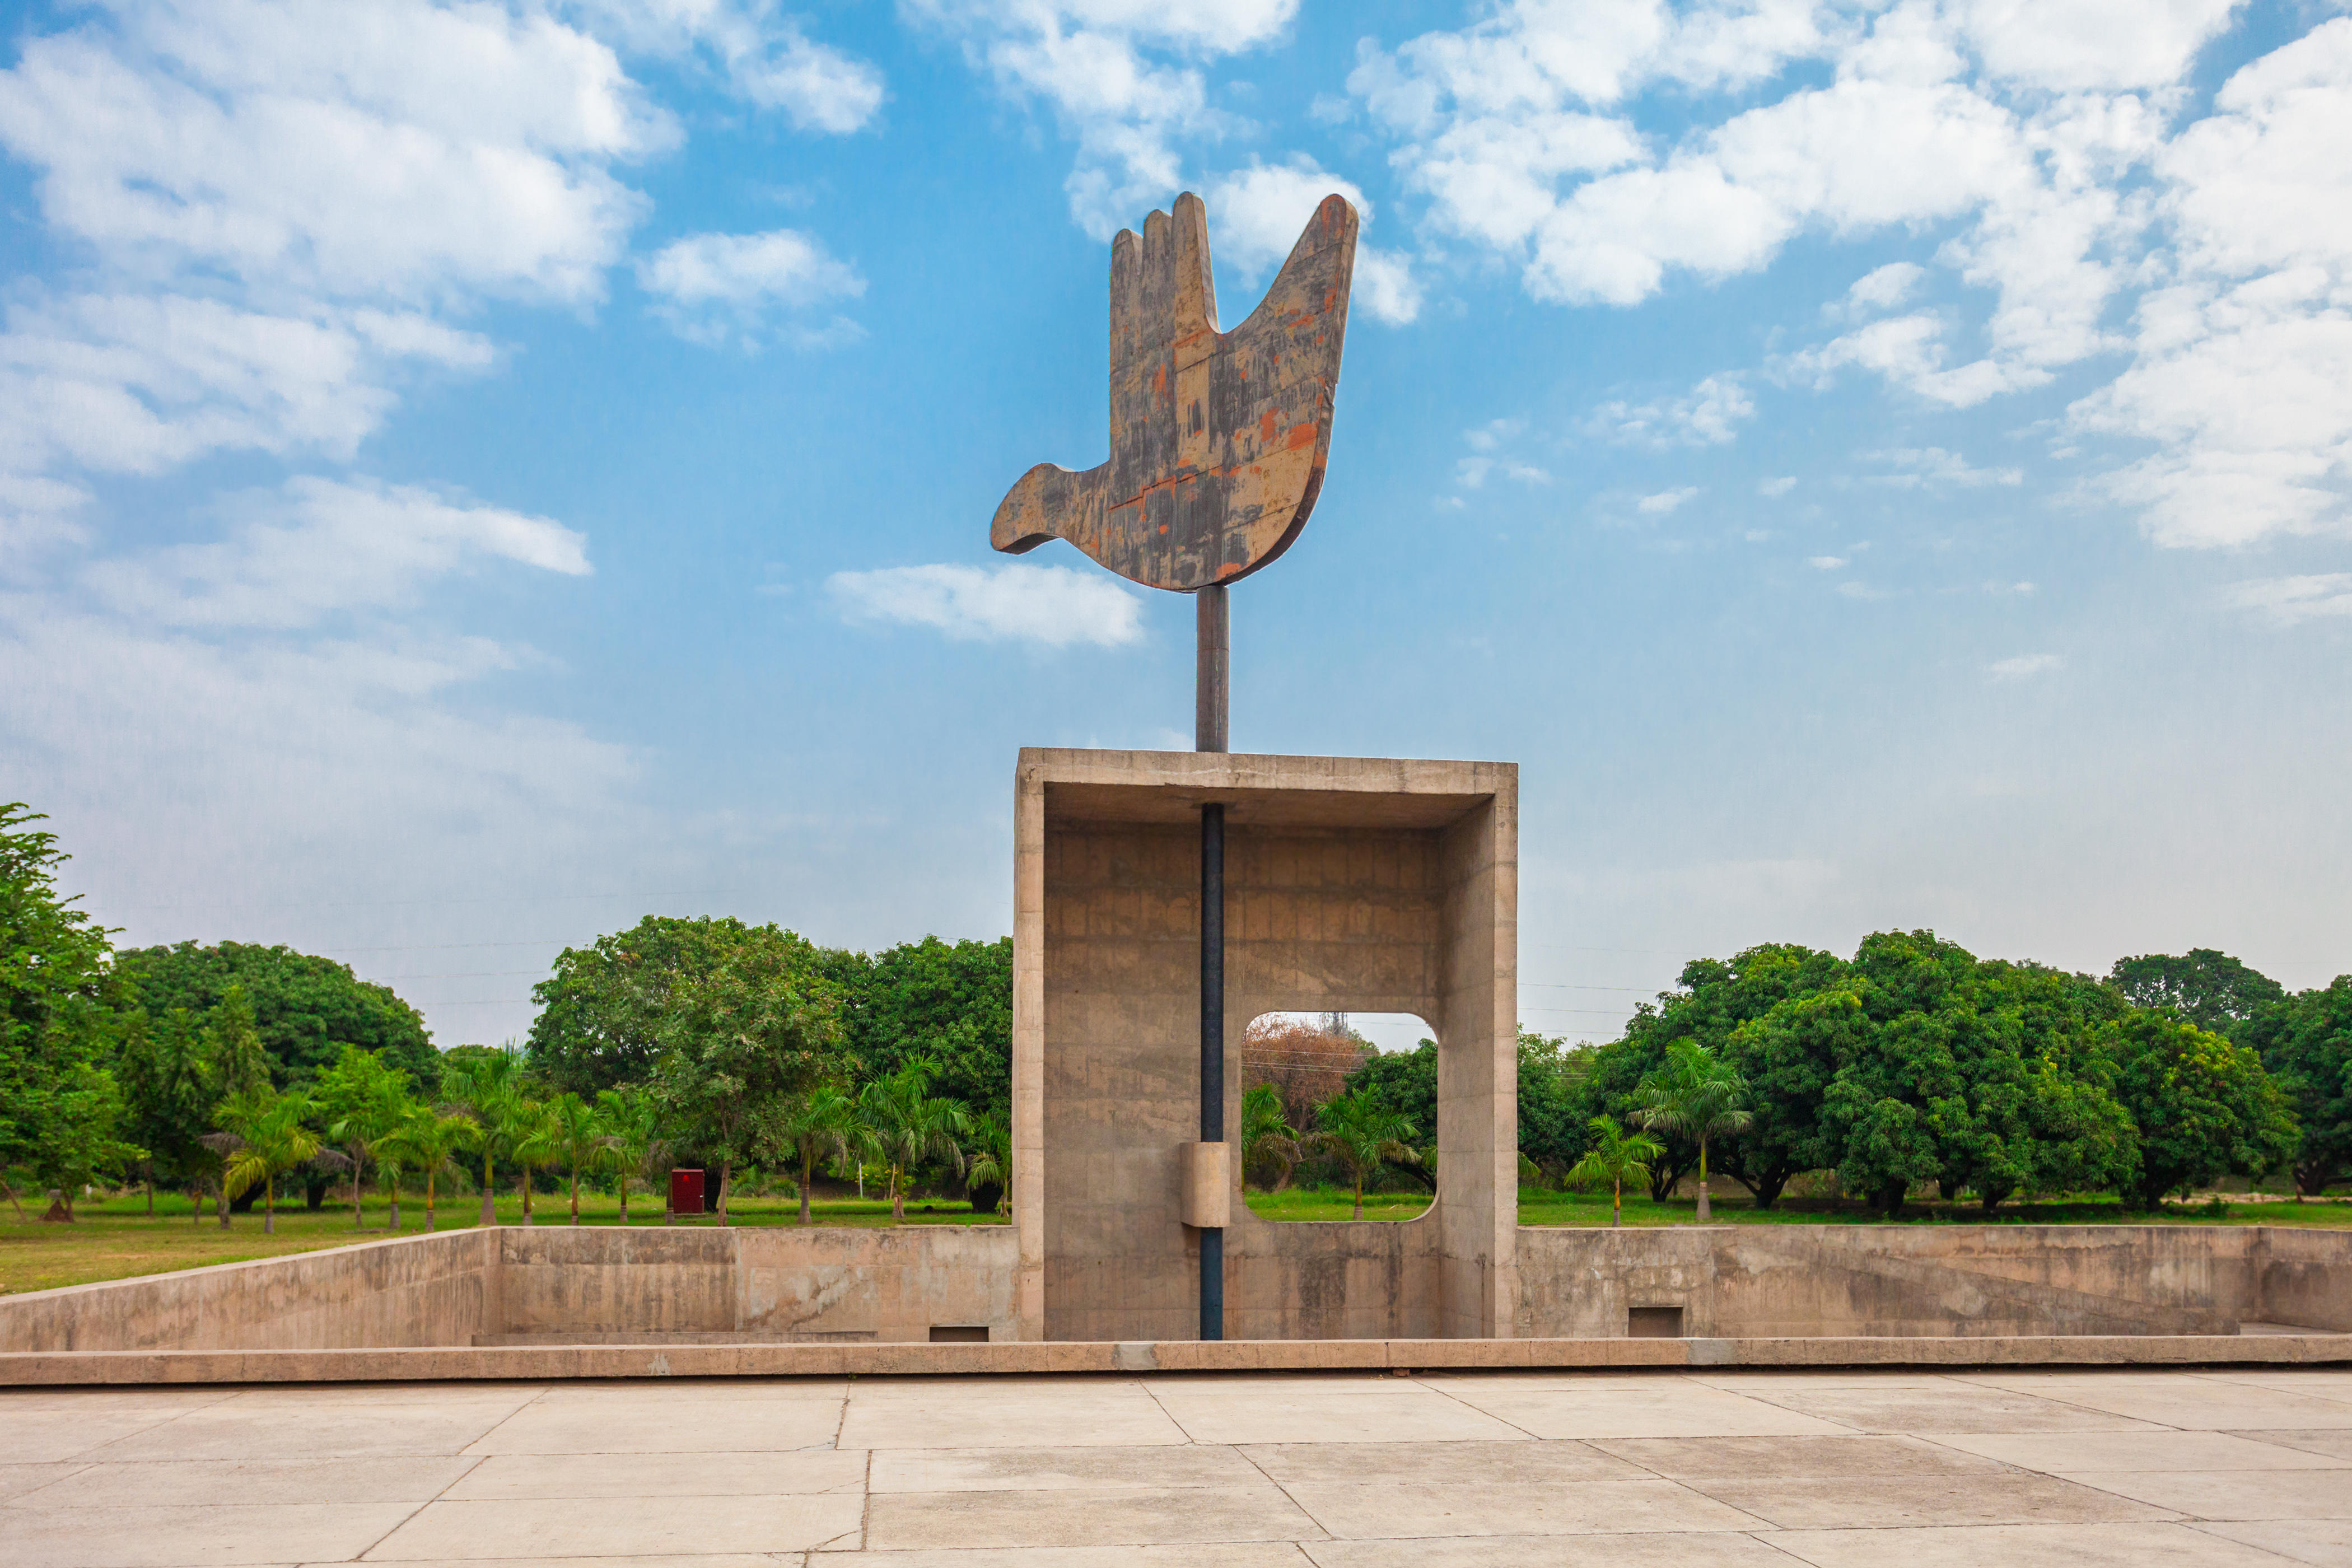 The Open Hand Monument is a symbolic structure located in the Indian Union Territory of Chandigarh, India,